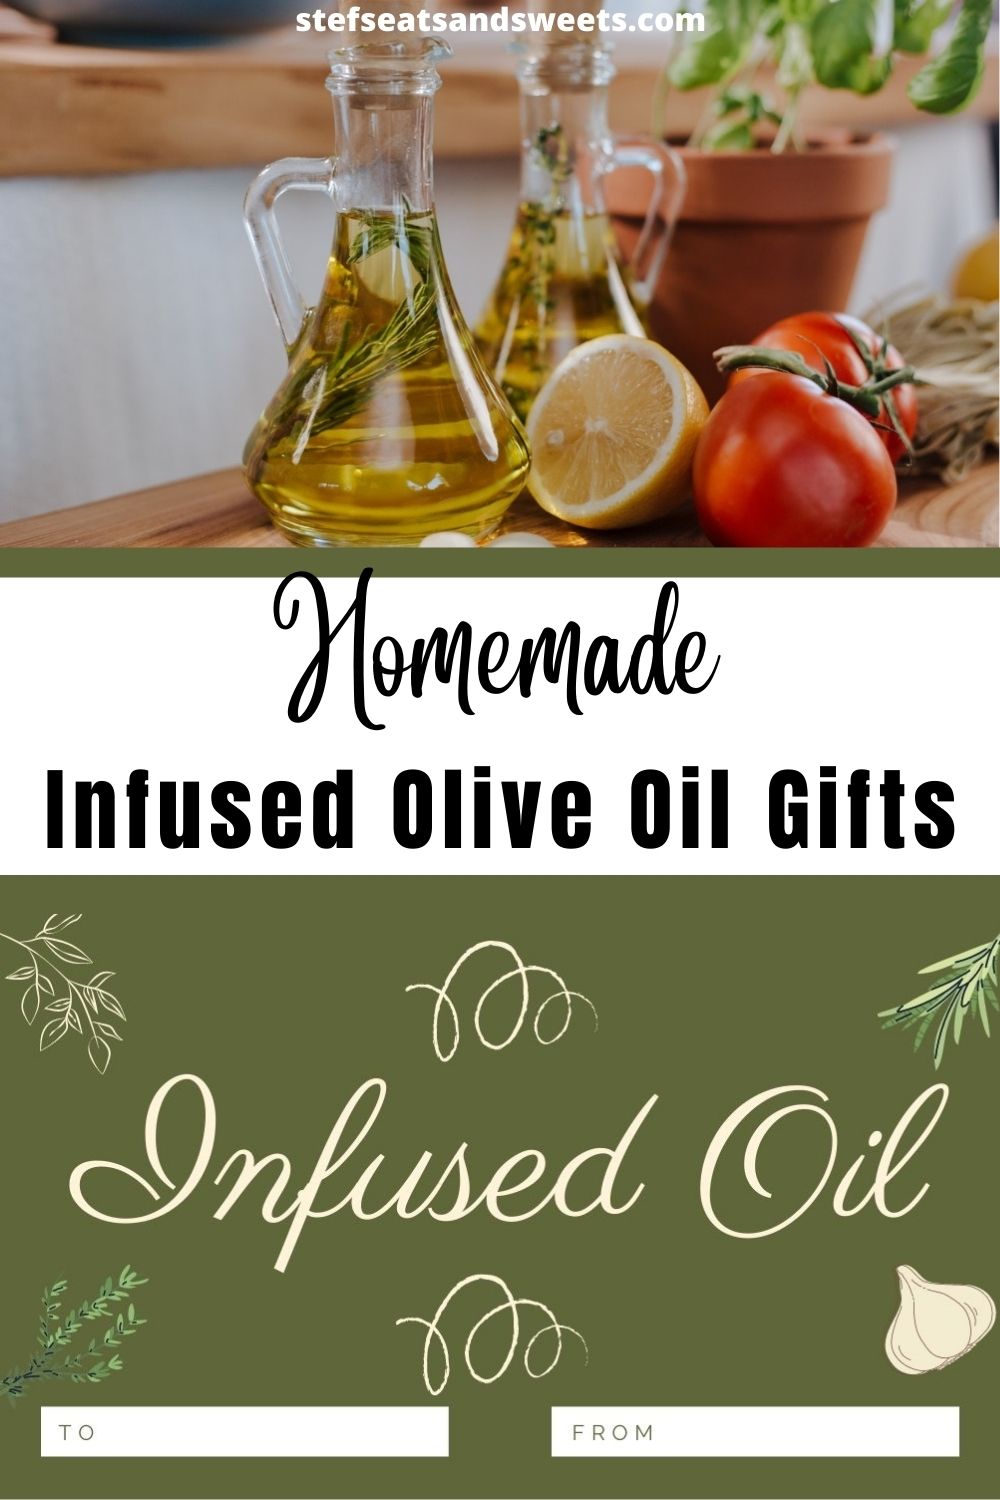 Infused oil gifts 